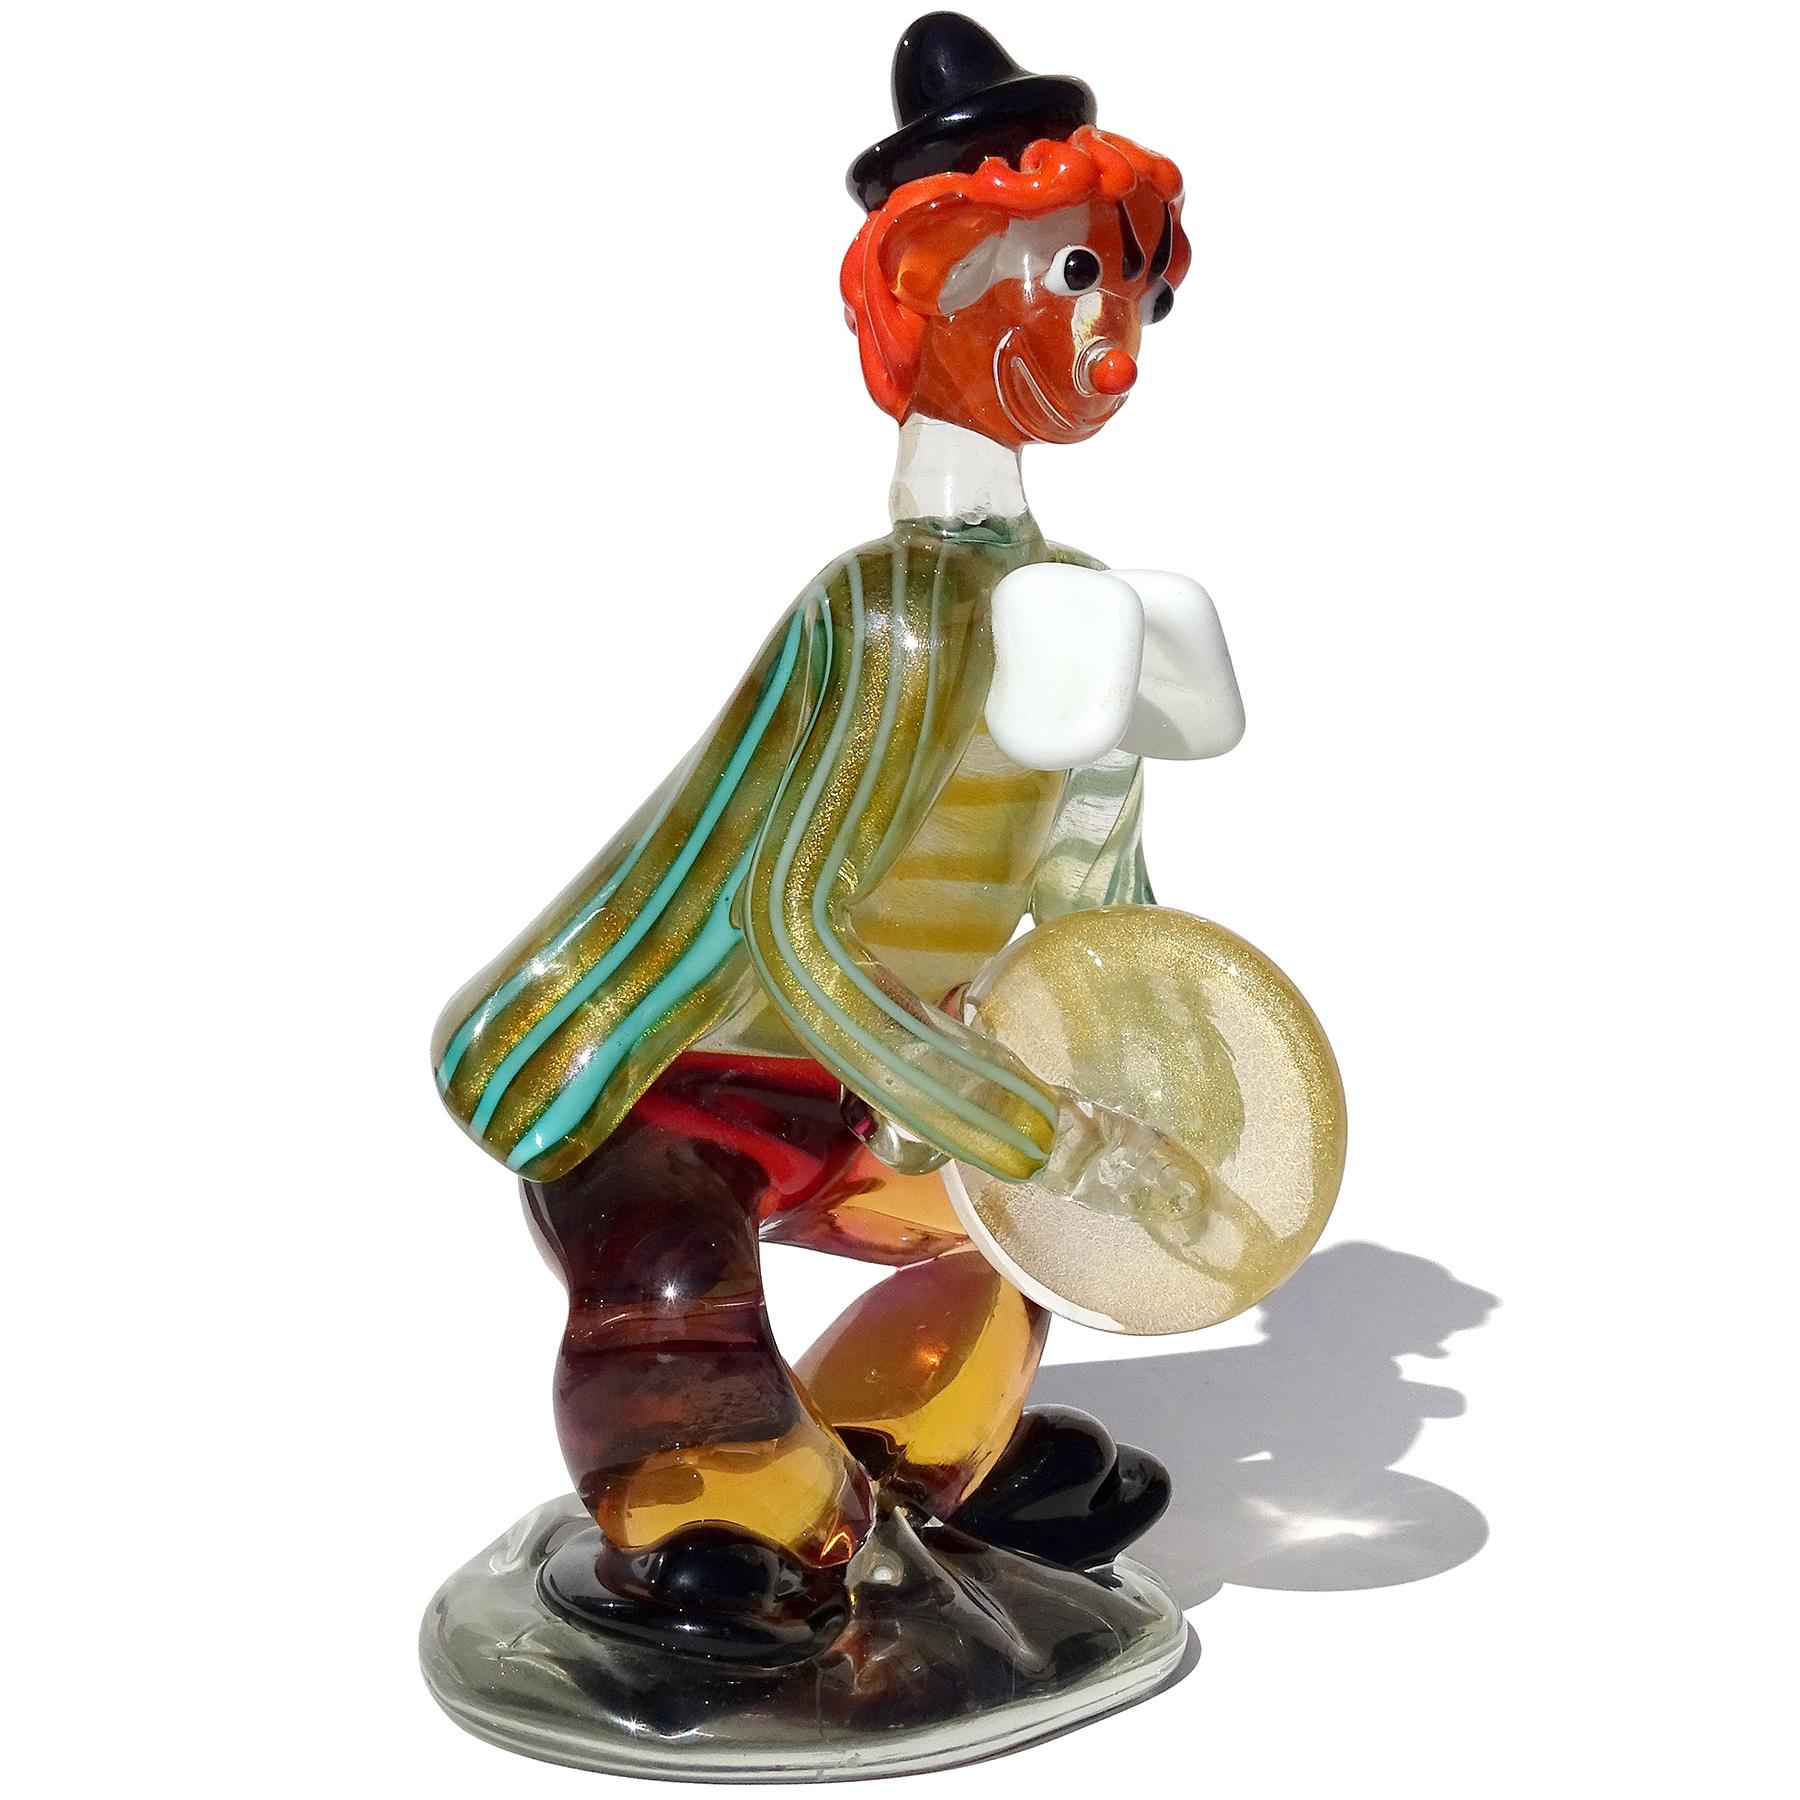 Beautiful and large, cute vintage Murano hand blown gold flecks Italian art glass musician clown playing the cymbals sculpture. Documented to designer Alfredo Barbini, for the Salviati company. The figure has a black hat, orange hair, large white